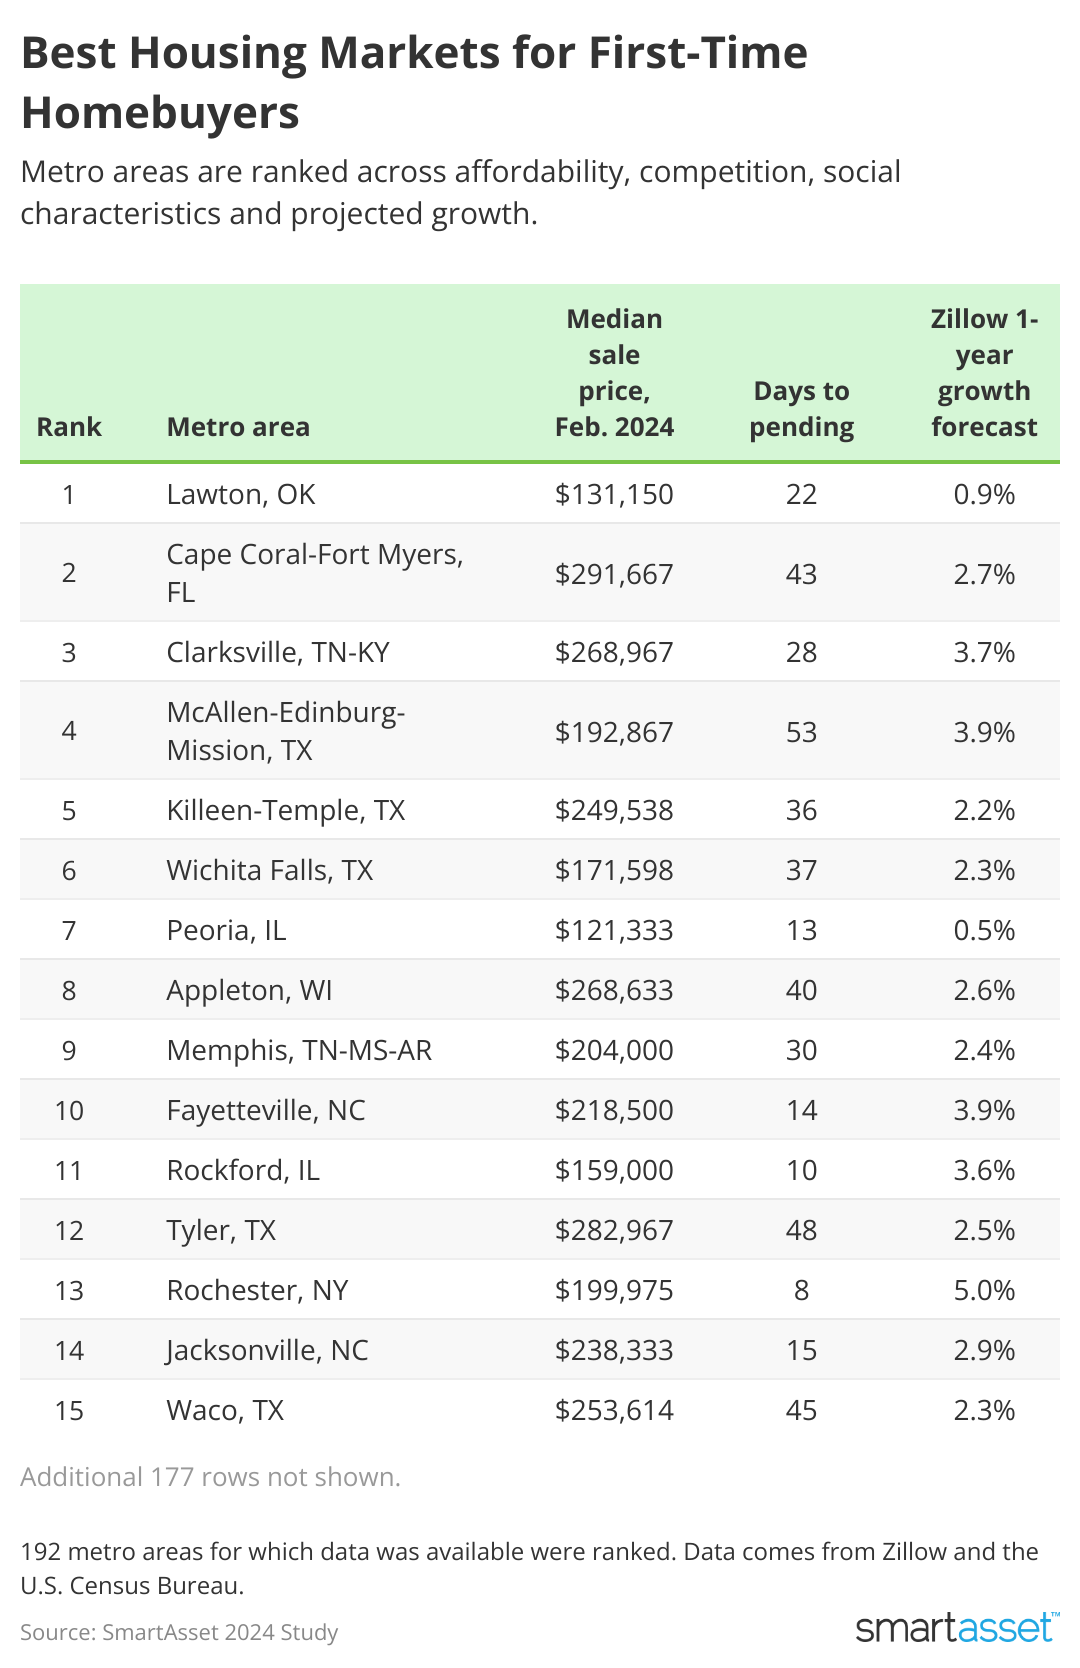 Table showing best housing markets for first-time homebuyers.